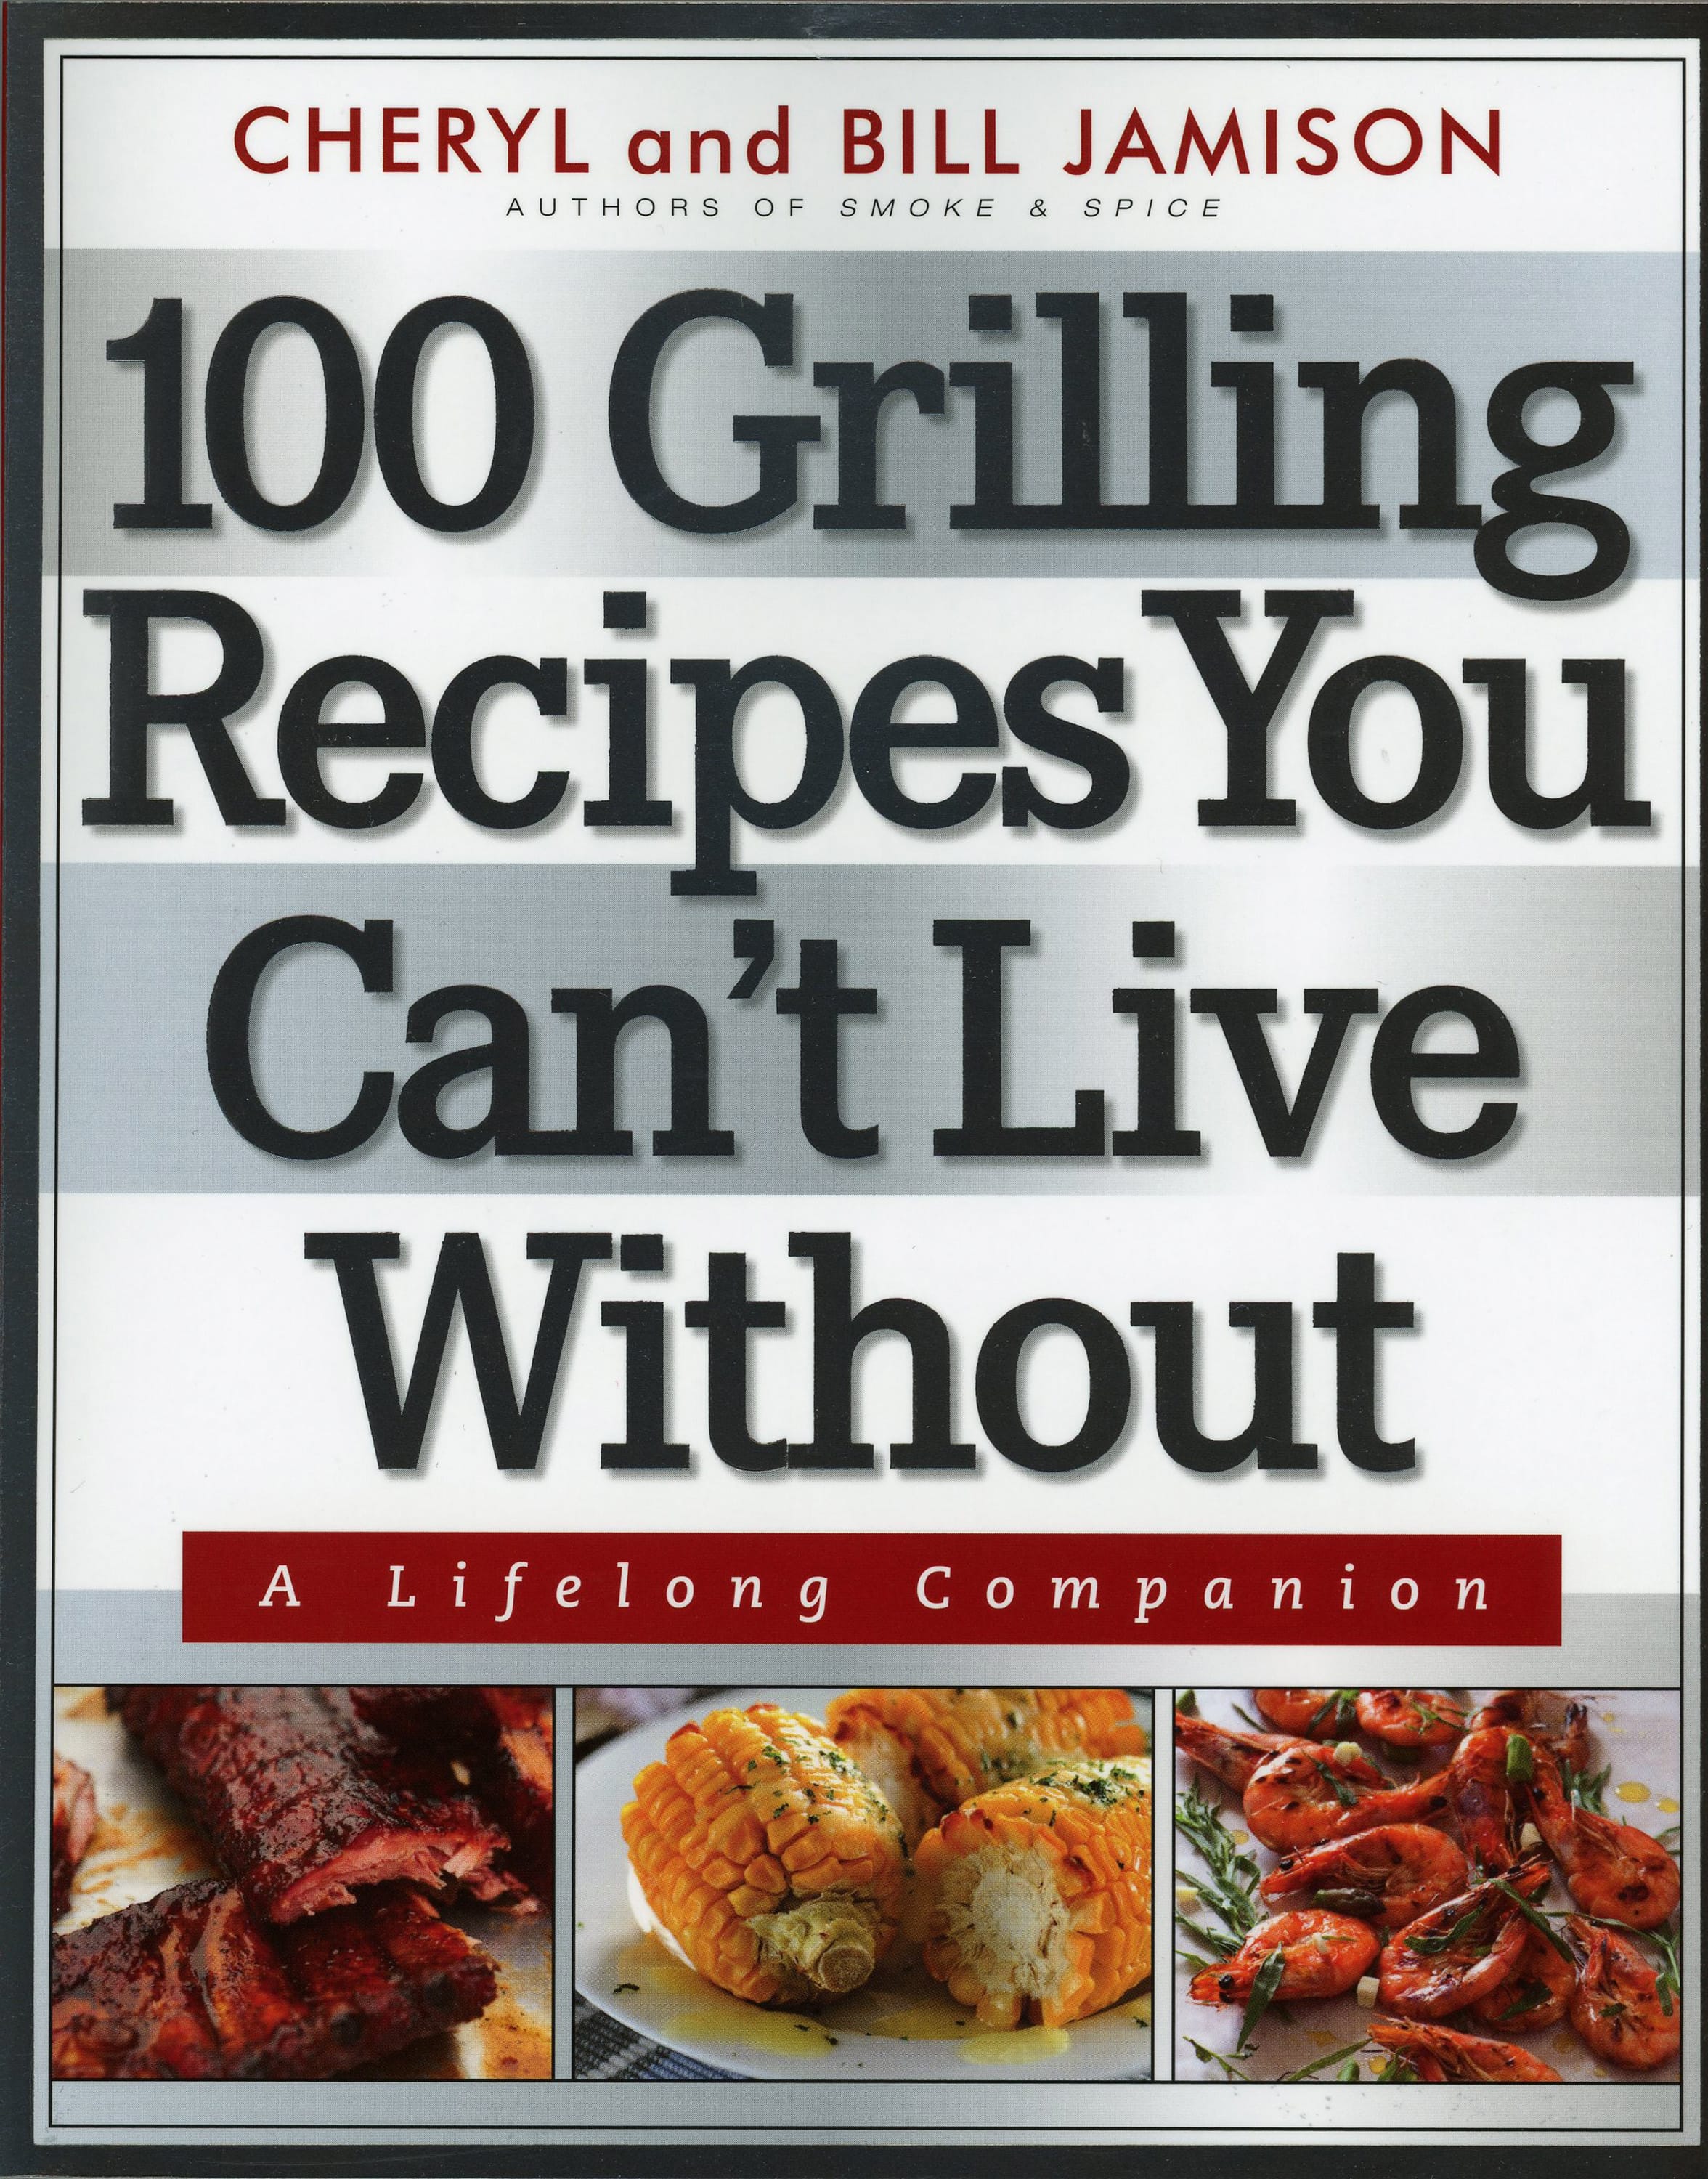 If the only pork you ever put on the grill is a slab of ribs, consider chops and tenderloins for an easy and tasty dinner.For some inspiration, consider the new book by James Beard-winning authors Cheryl and Bill Jamison, &quot;100 Grilling Recipes You Can't Live Without: A Lifelong Companion&quot; ($16.95, softcover, Harvard Common Press).